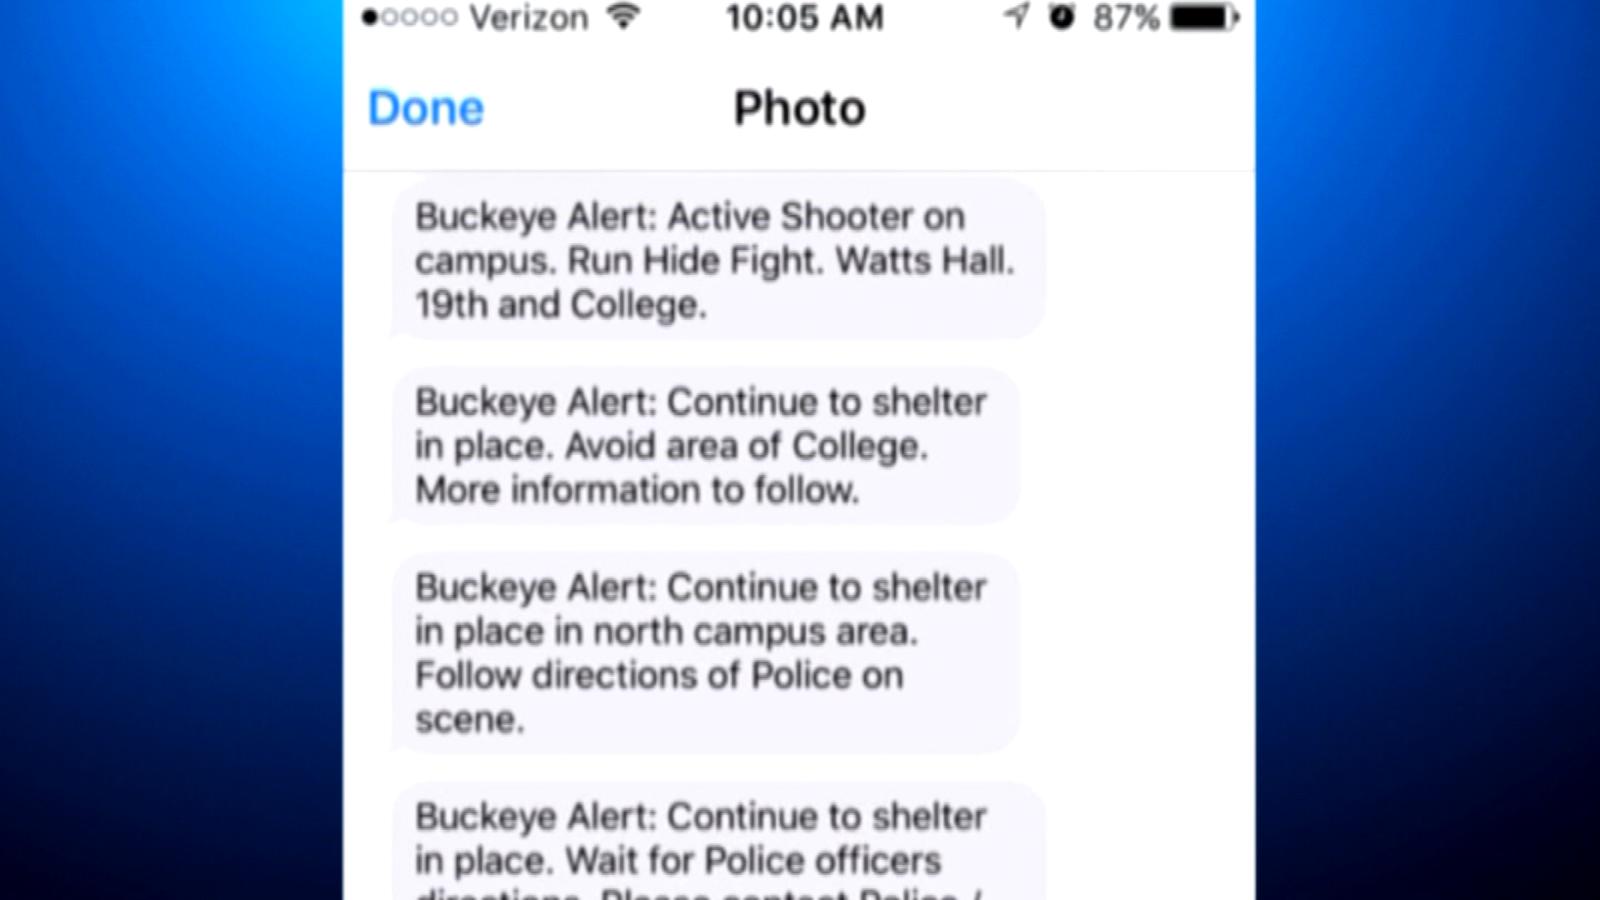 ohio-state-active-shooter-12vo9-transfer